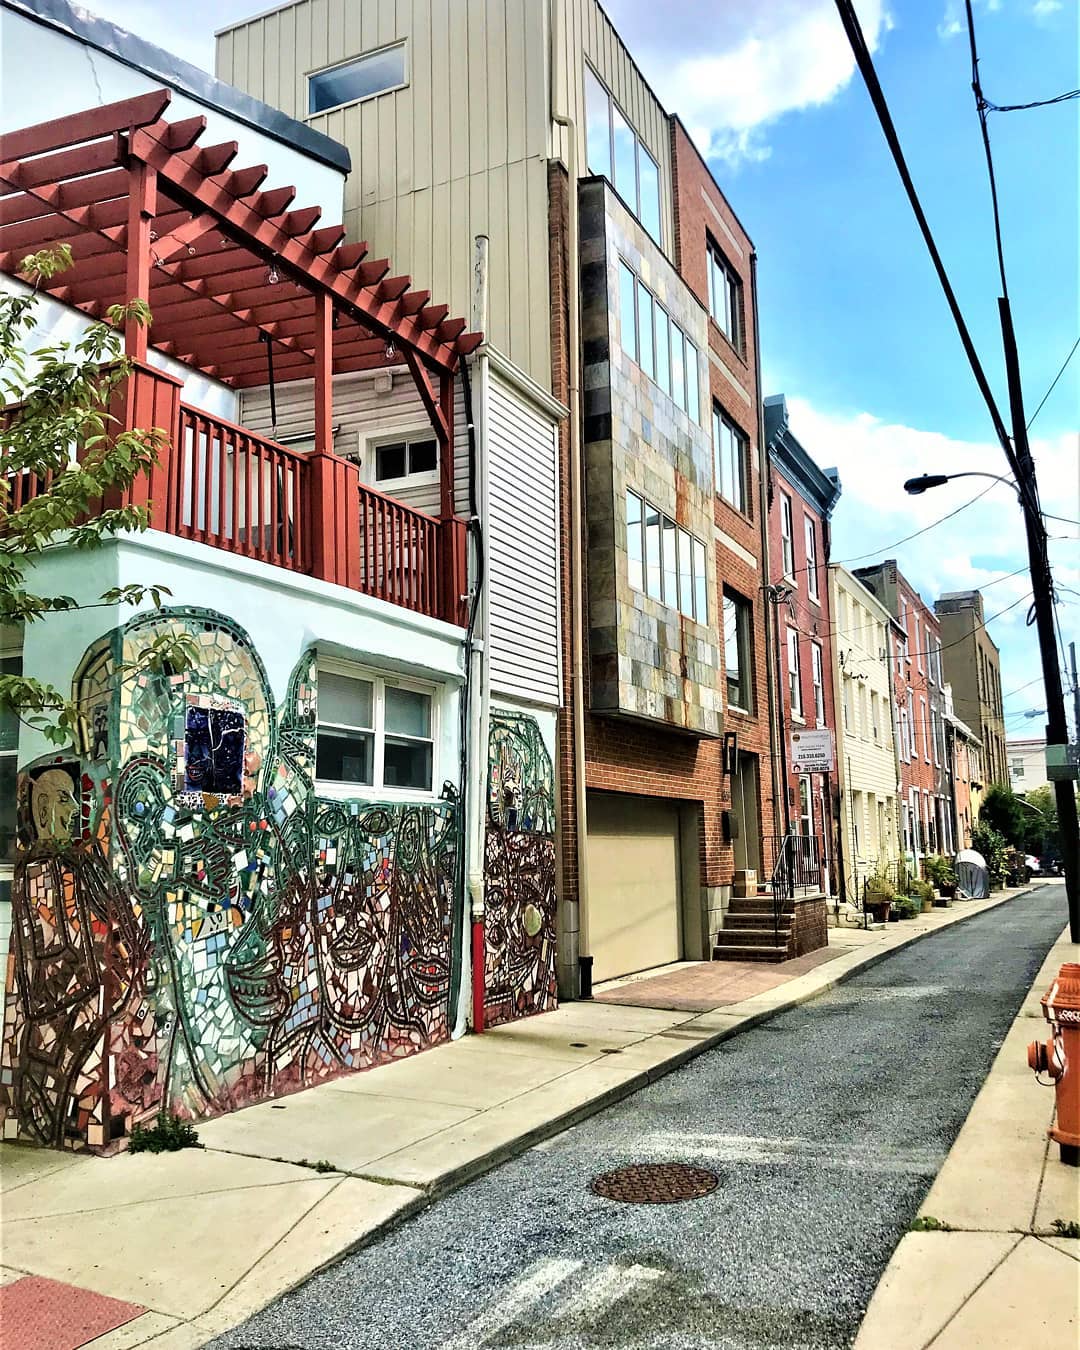 Buildings with mural painted on it in Bella Vista, Philadelphia. Photo by Instagram user @localphillyliving